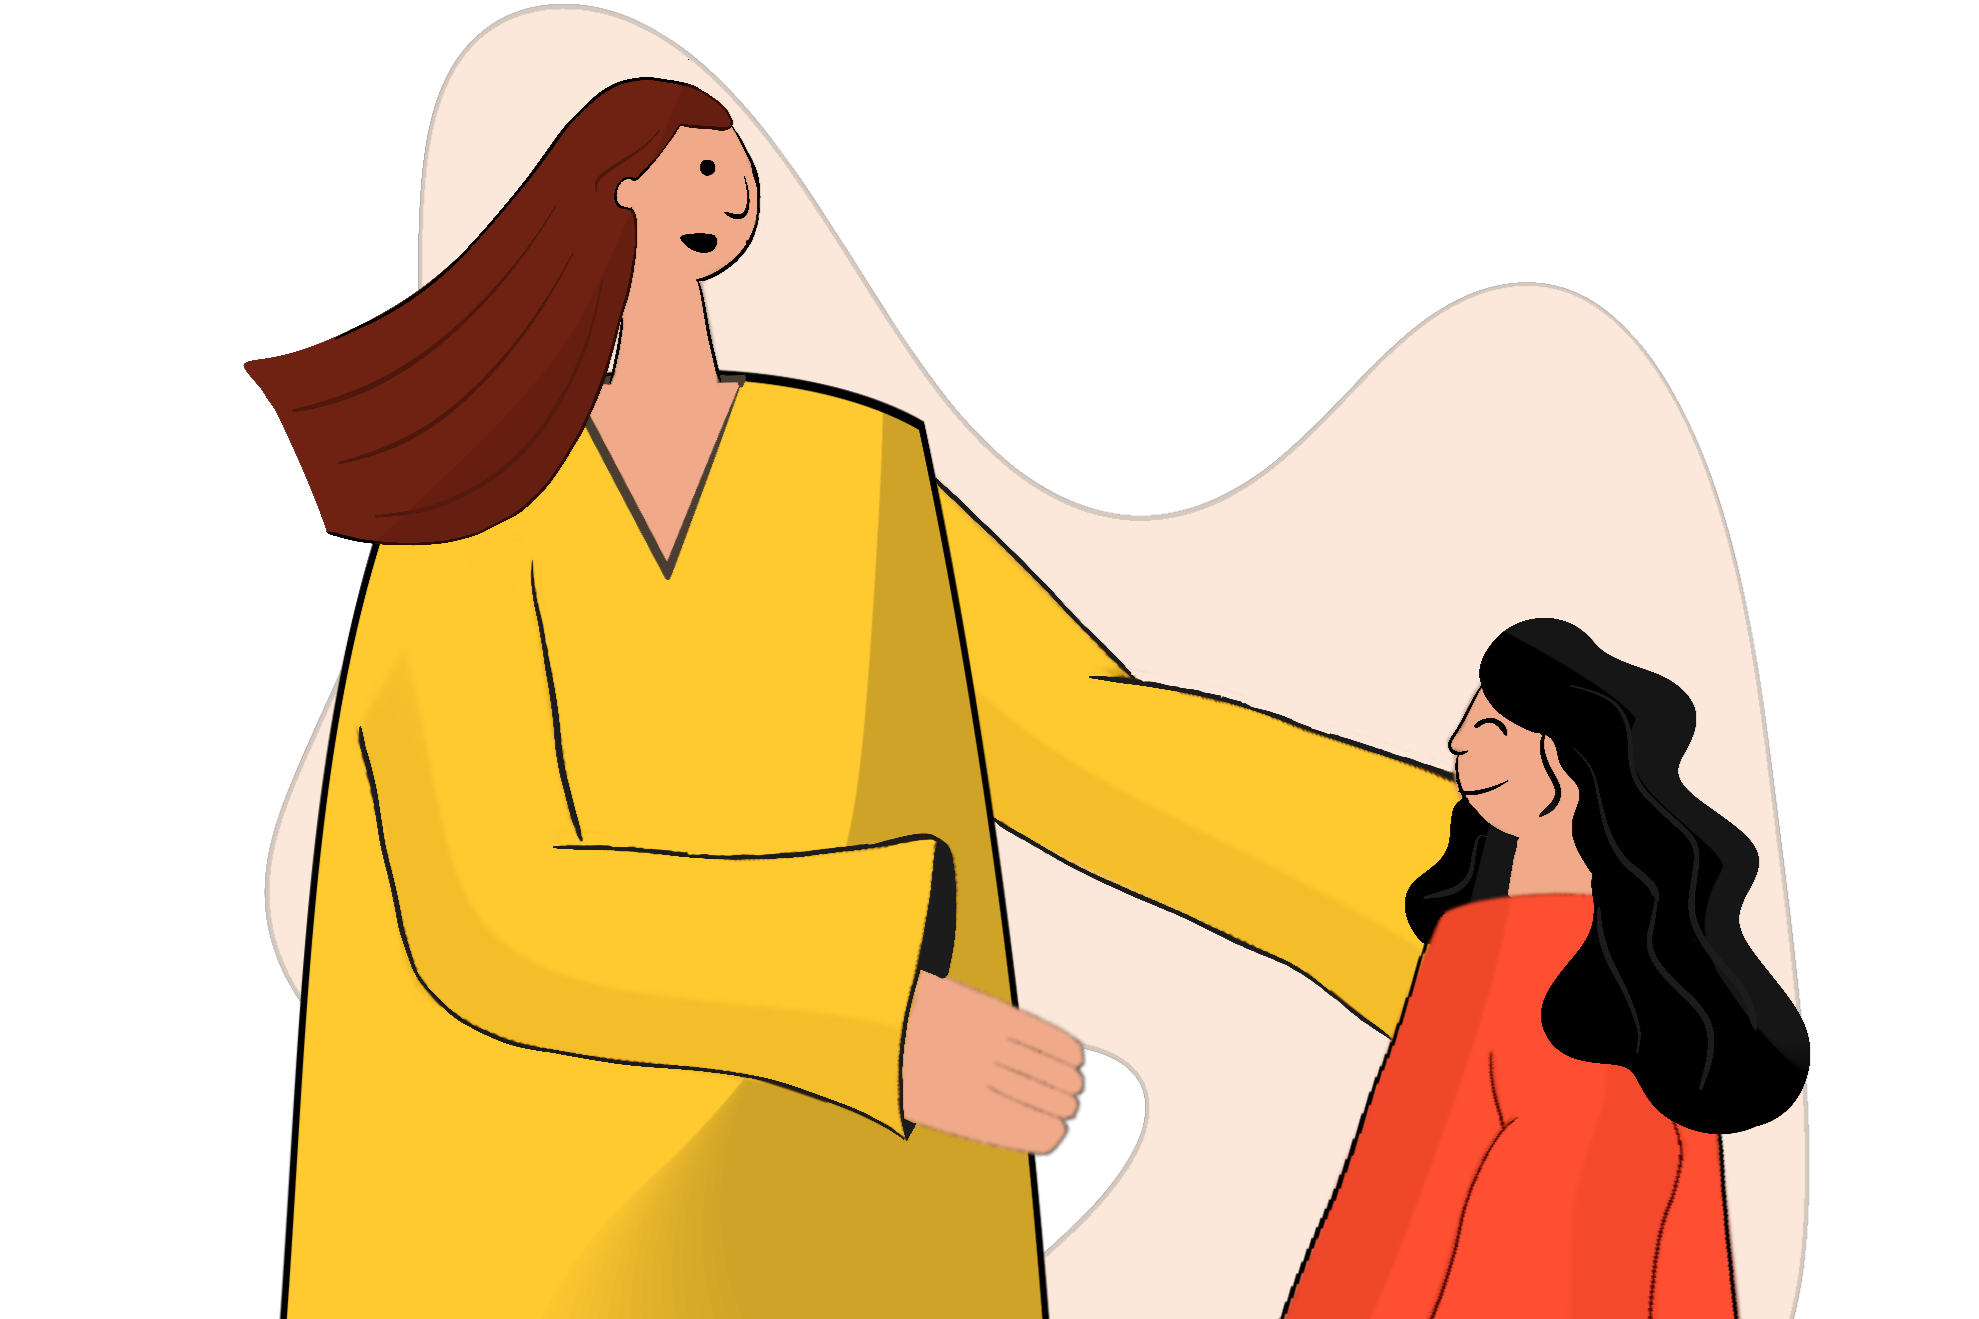 cartoon image of an adult and child talking